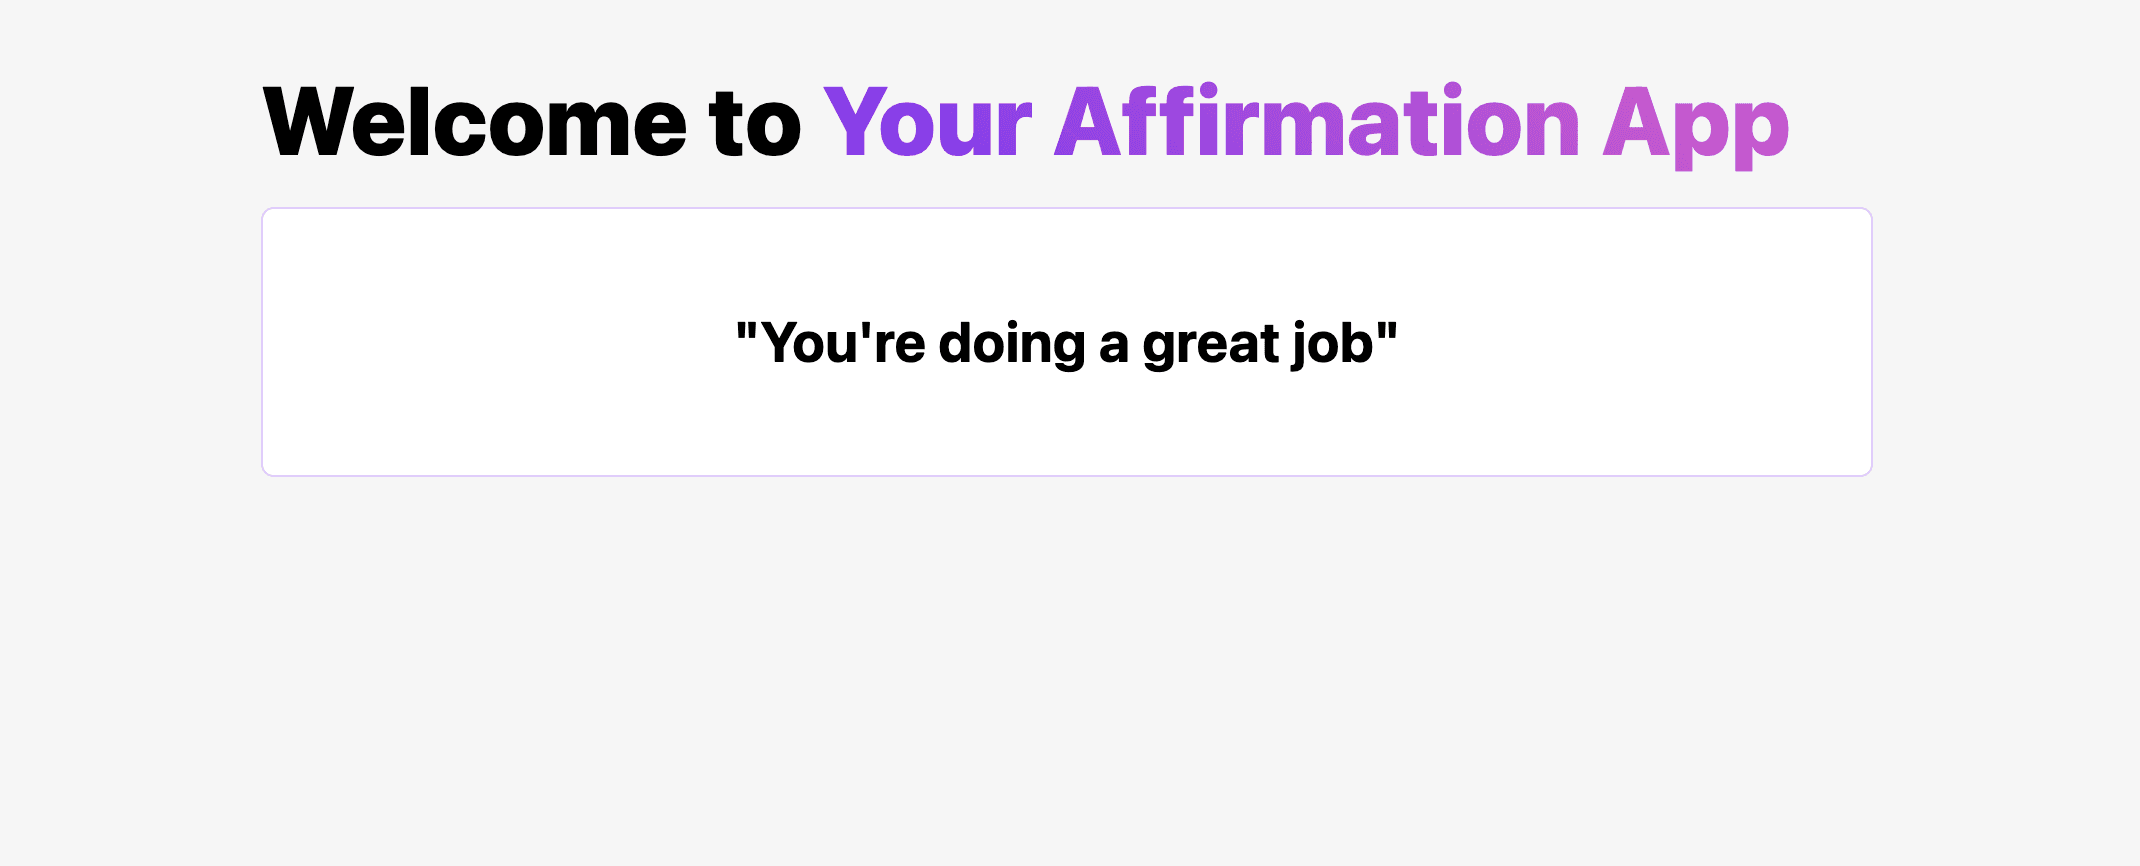 Your final project - an affirmation app